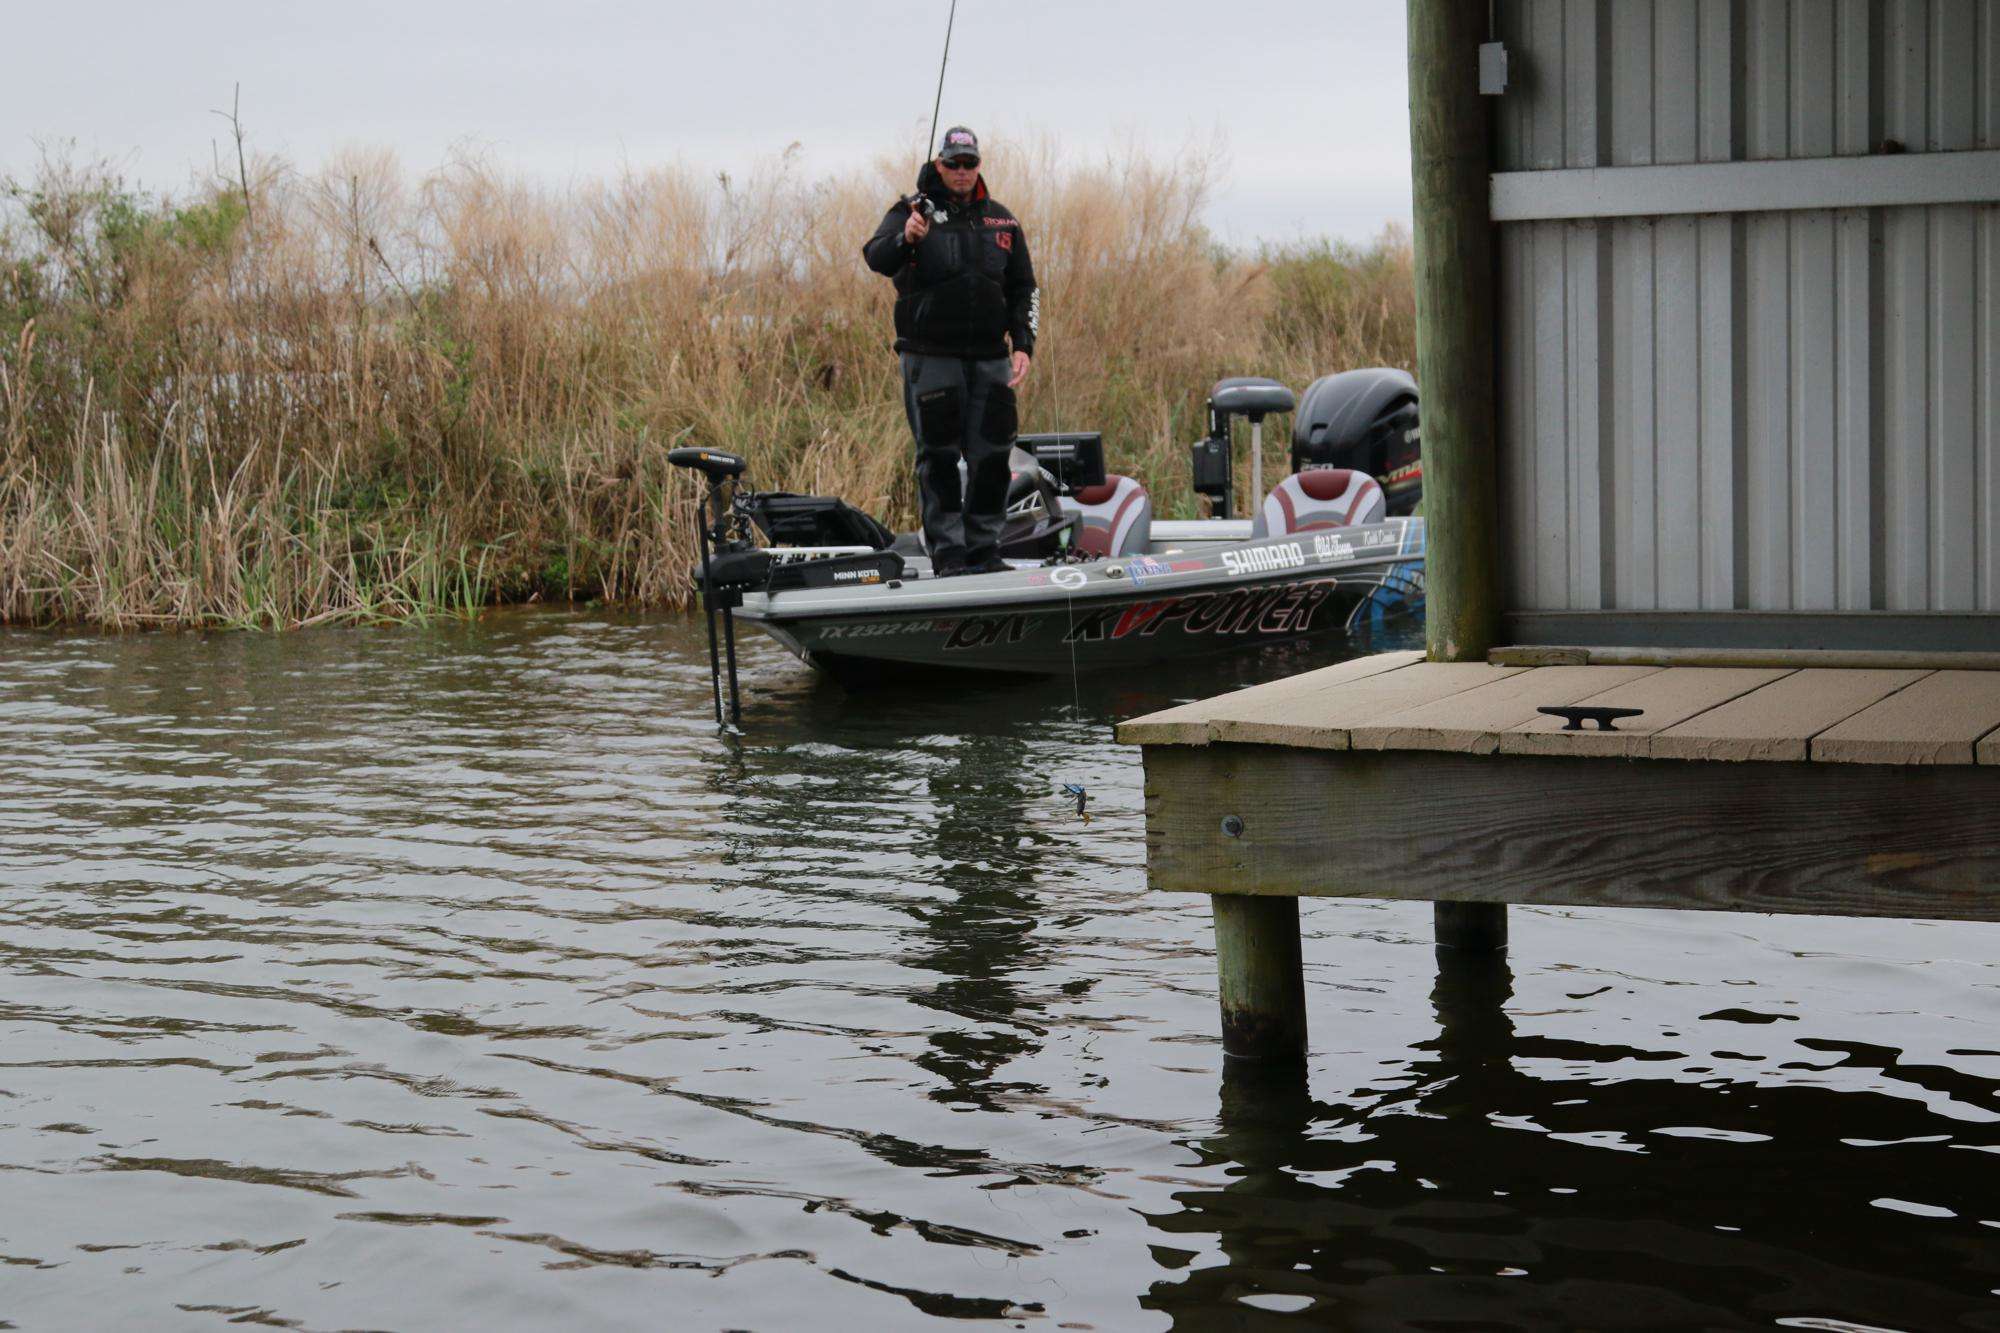 Pitching jigs to hard targets like dock pilings has put a lot of fish in his boat.